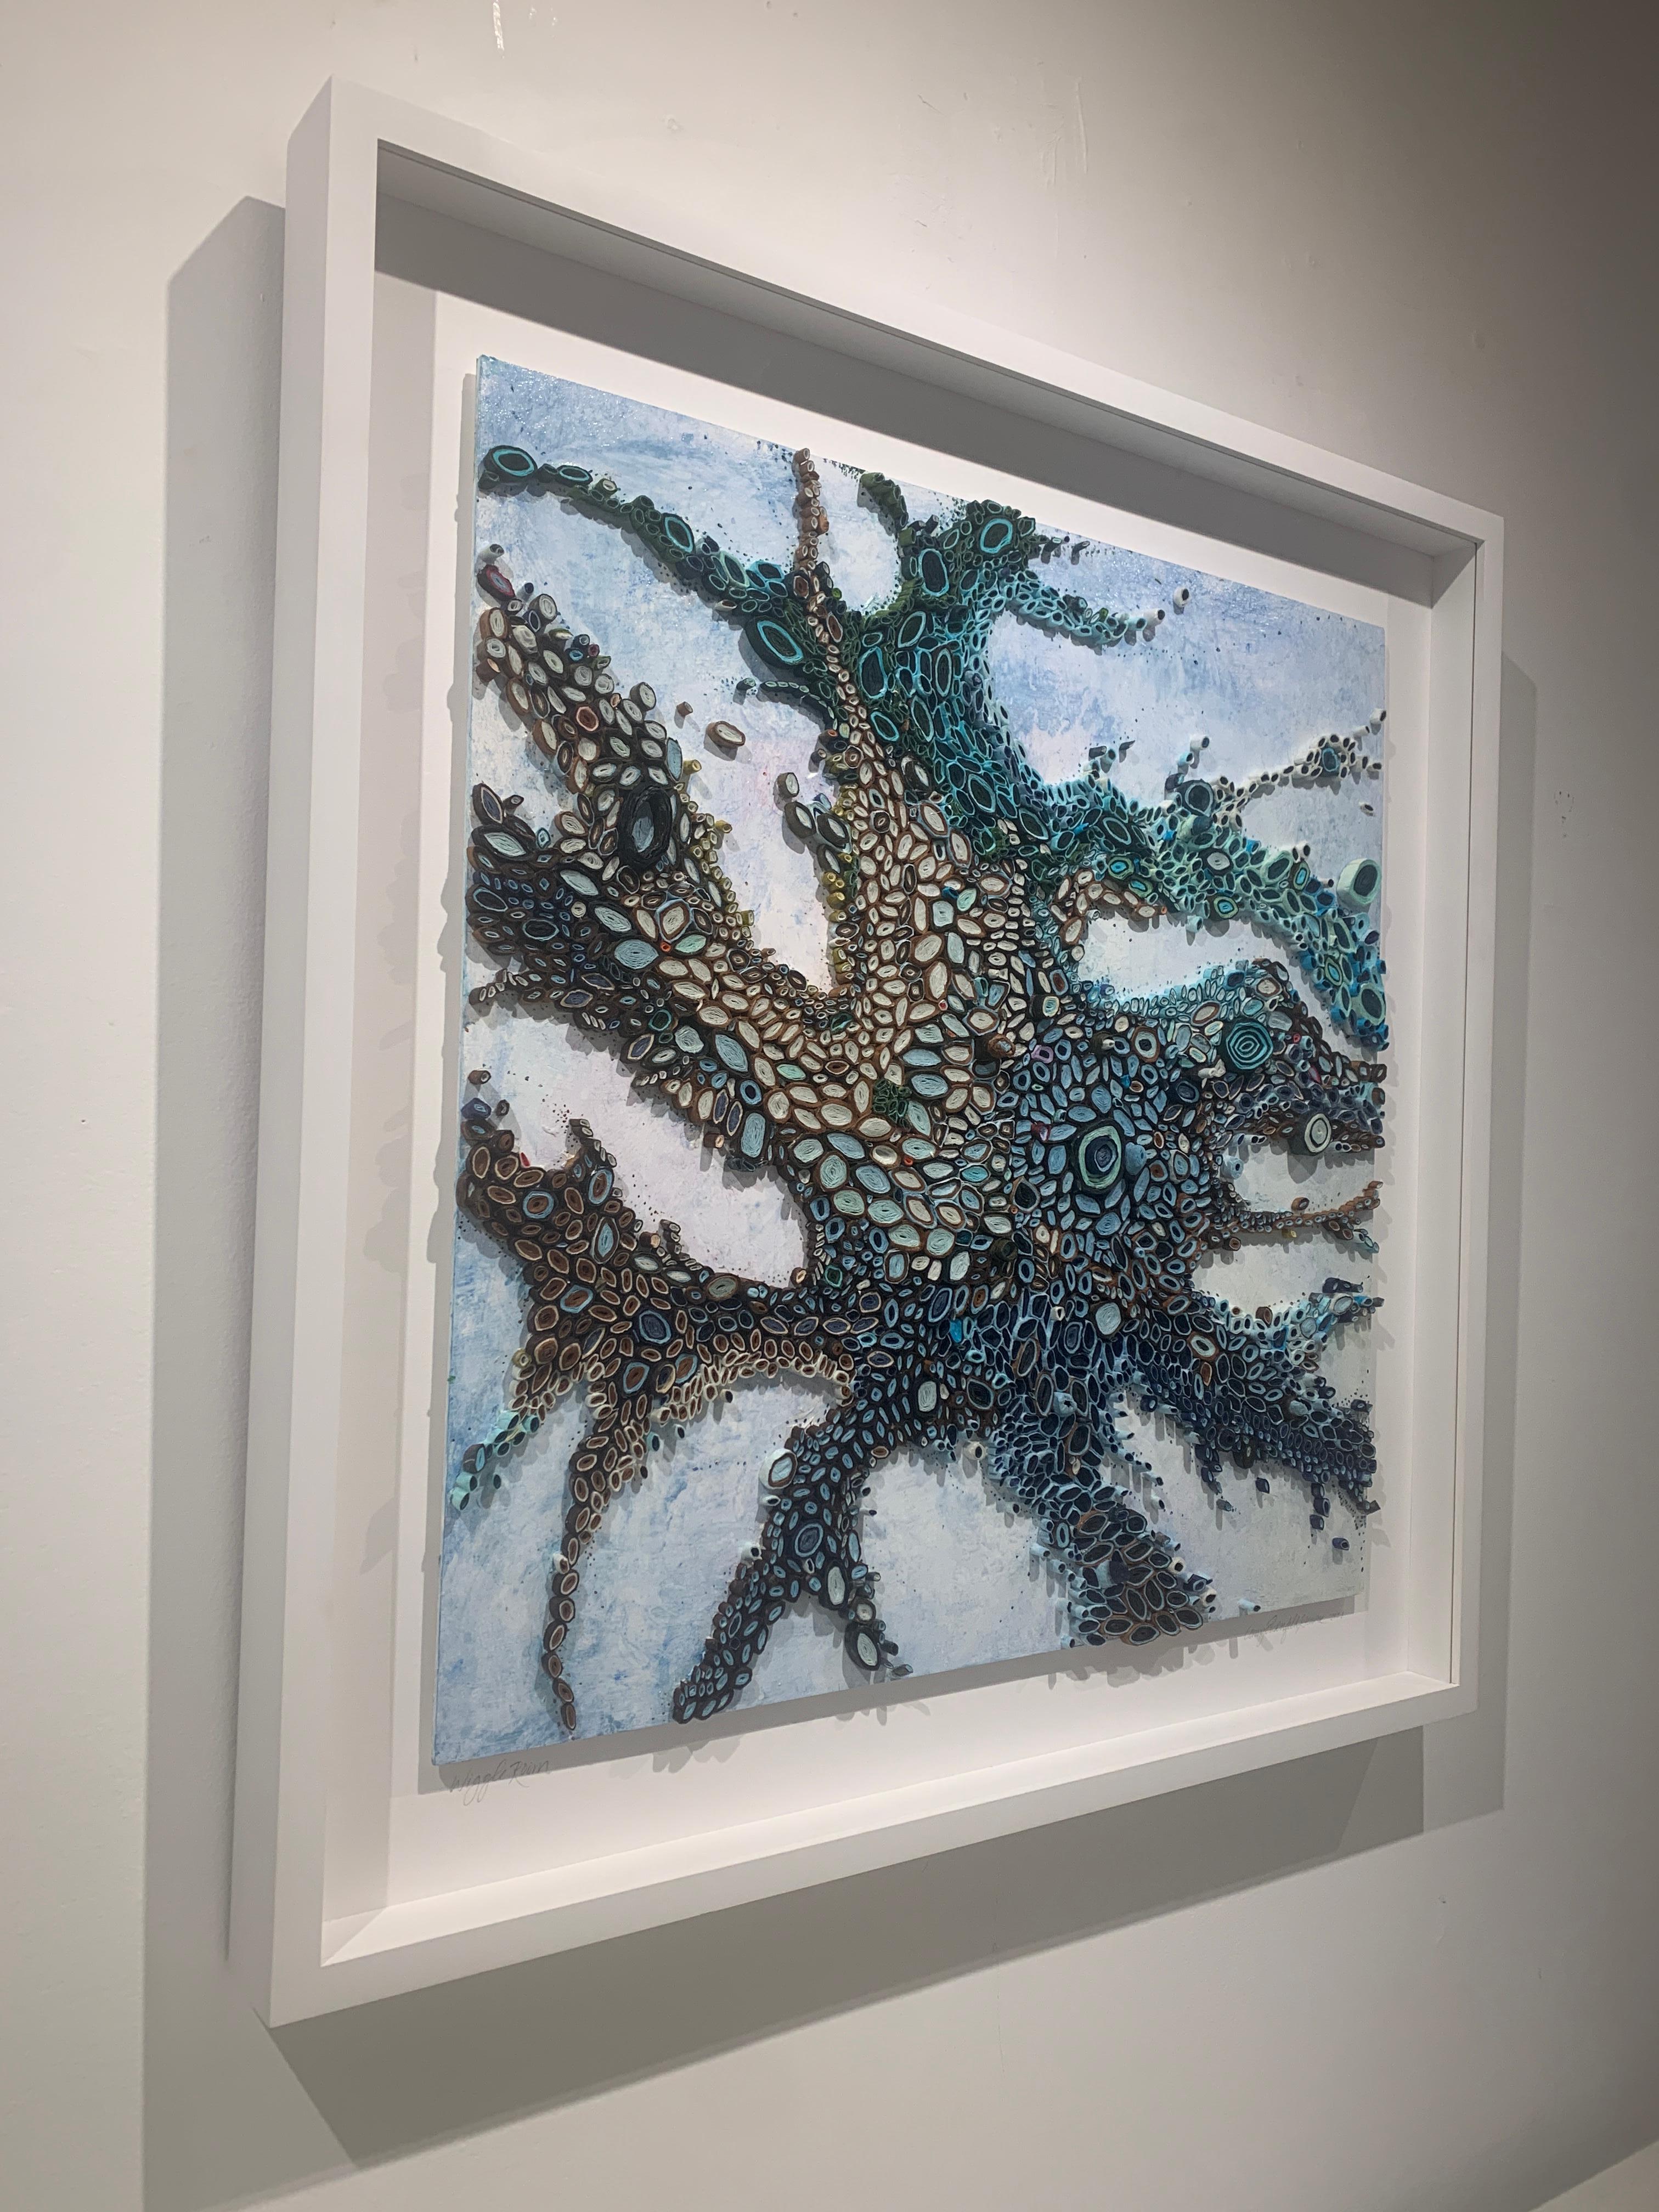 Mixed Media artist Amy Genser makes dimensional paper collages. These colorful, textural, one-of-a-kind wall pieces embody movement and processes. She masterfully manipulates paper -- each piece being cut, rolled and stacked -- to mimic organic